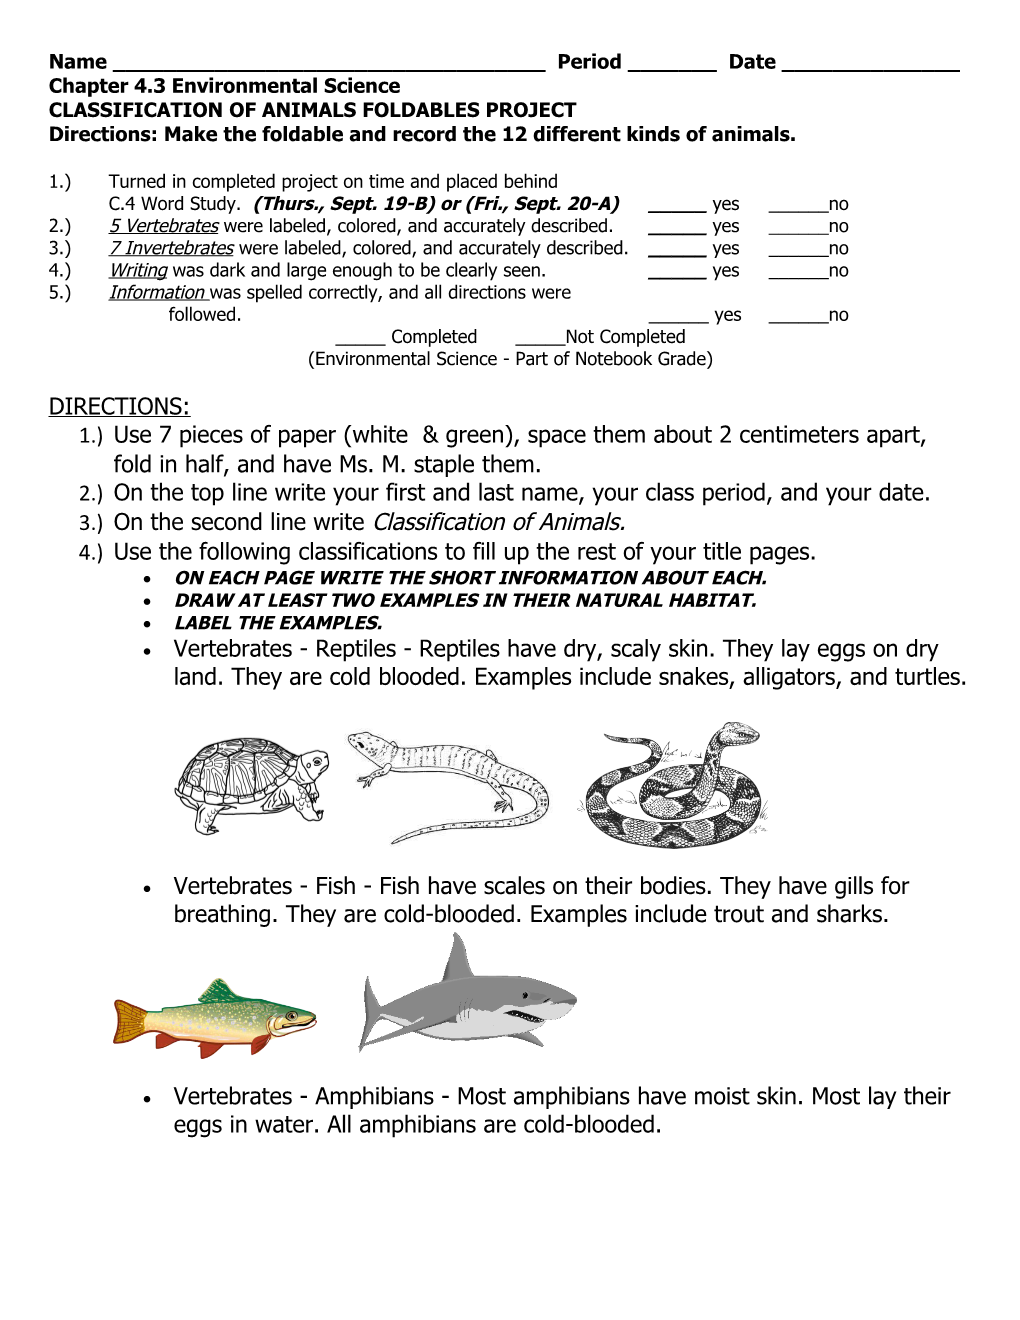 Classification of Animals Foldables Project